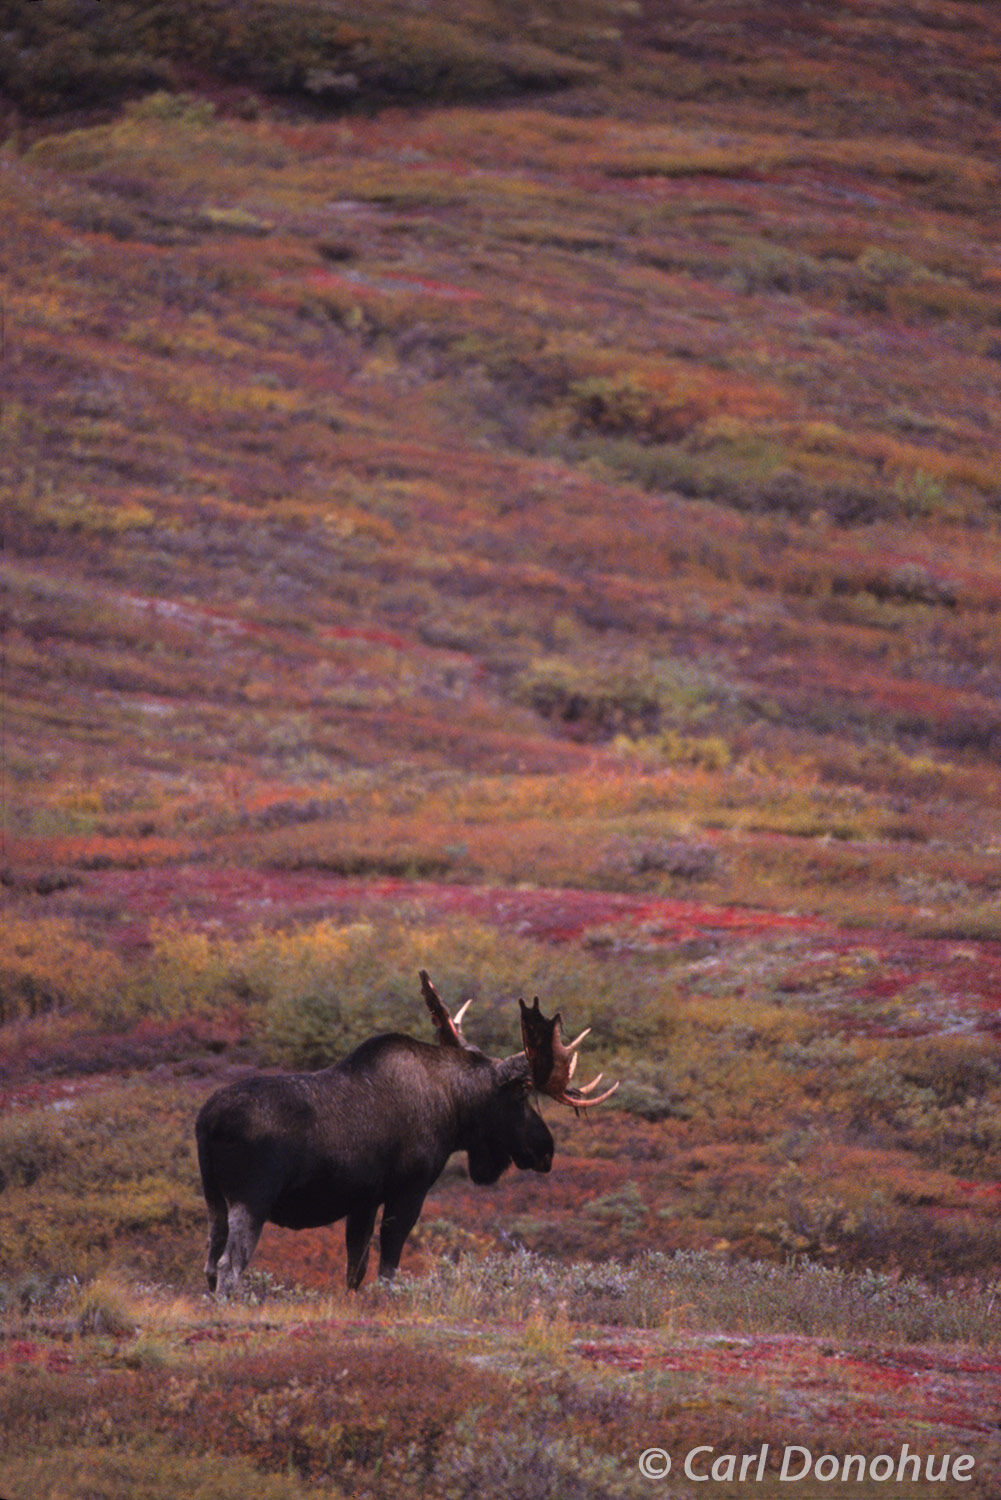 The majesty of the Alaskan wilderness is on full display in this photo of a bull moose in Denali National Park and Preserve...